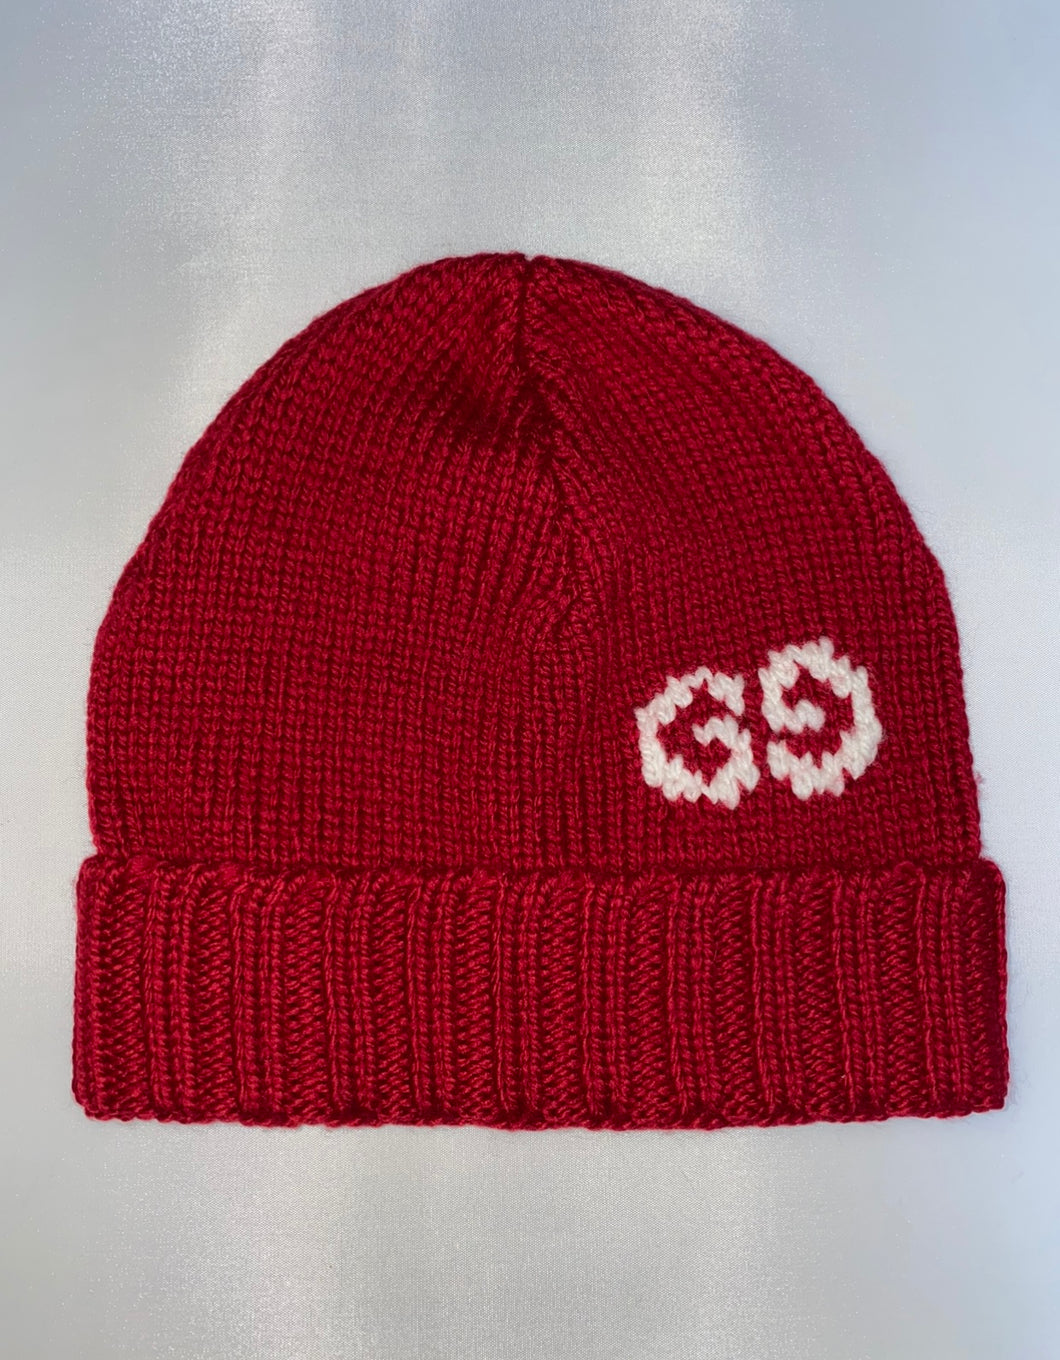 Gucci GG Logo Wool Beanie Hat in Red